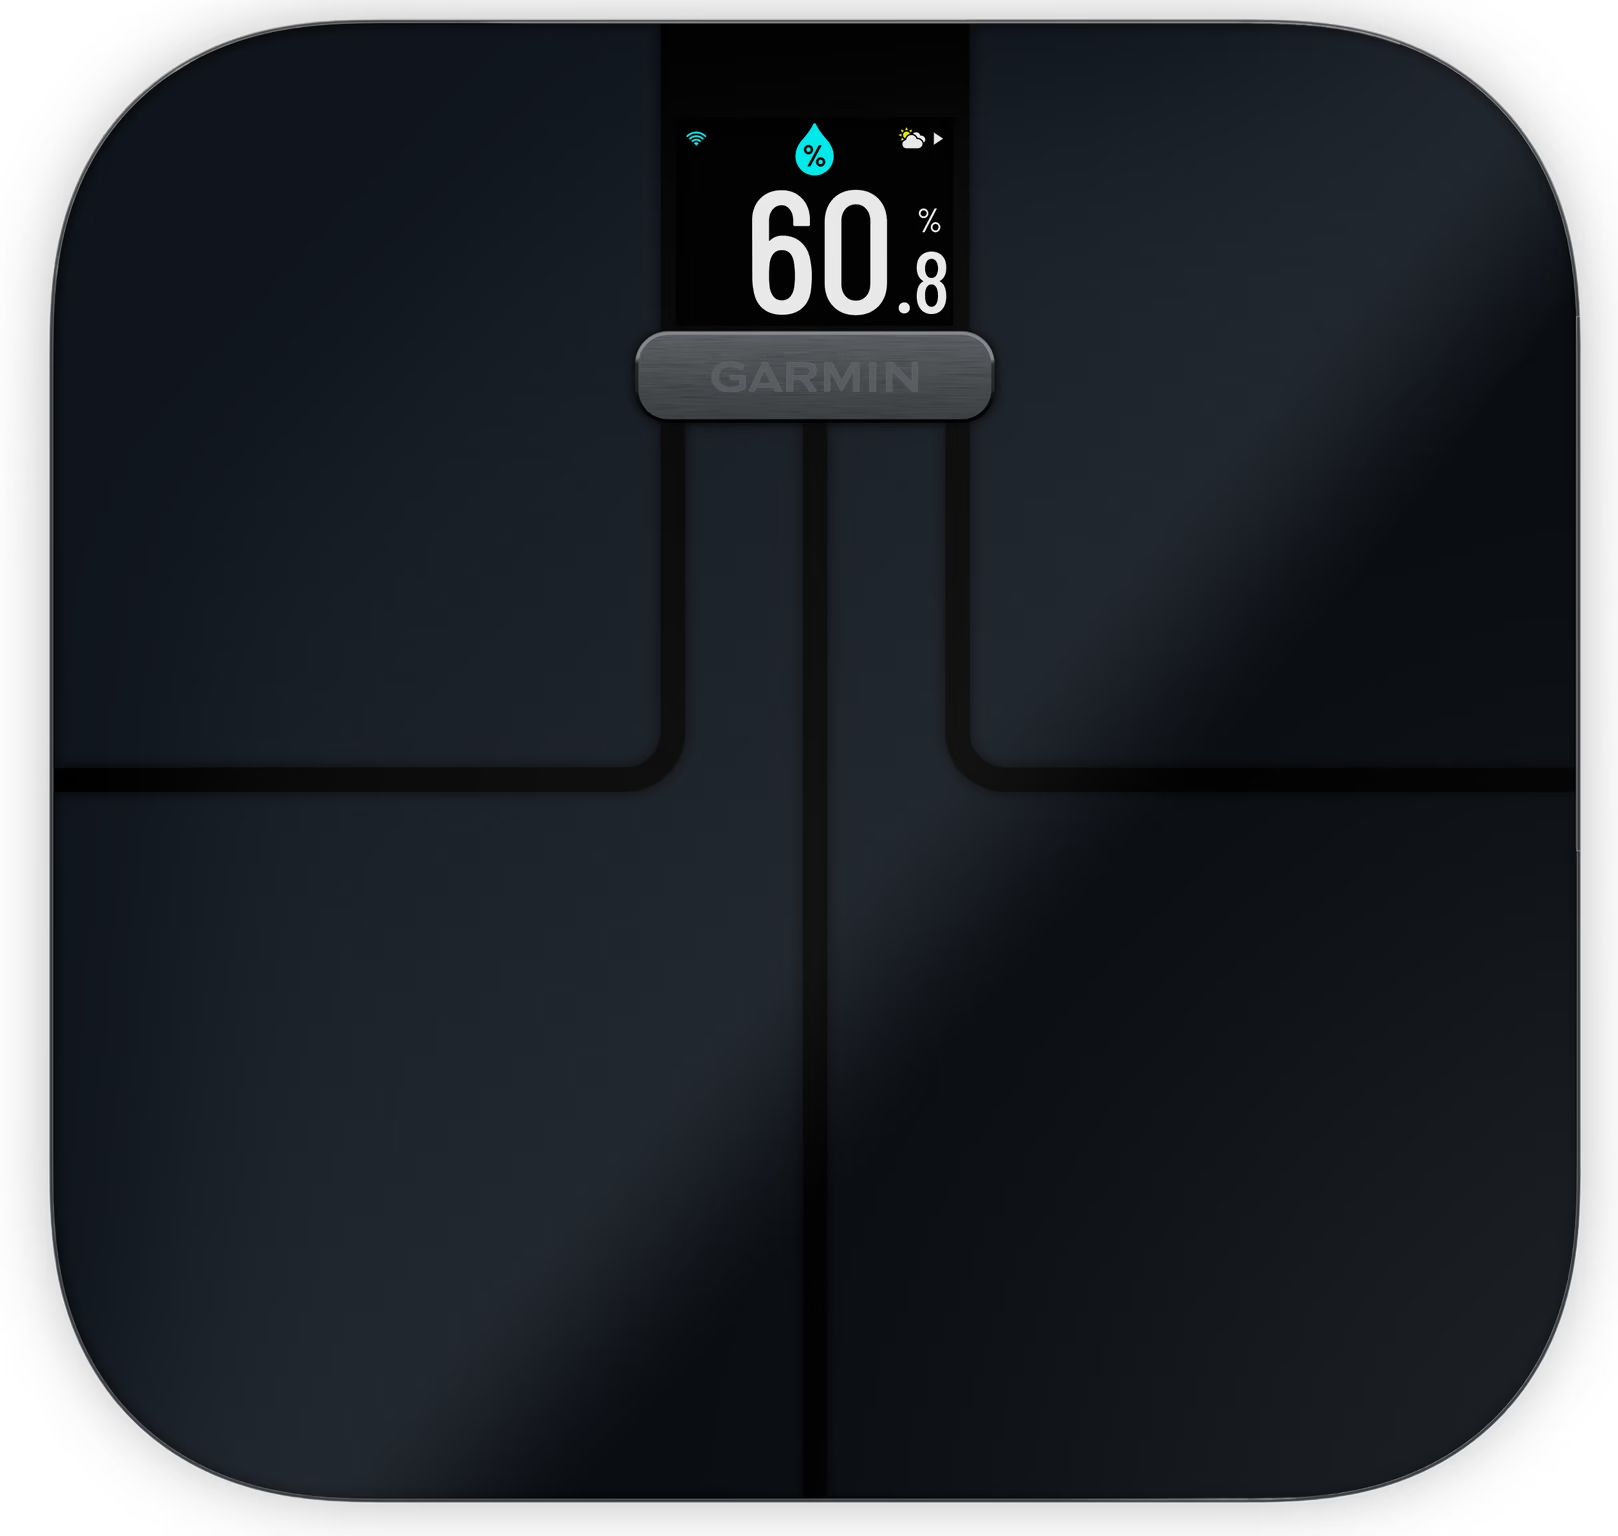 A black garmin scale displays a weight of 60.8